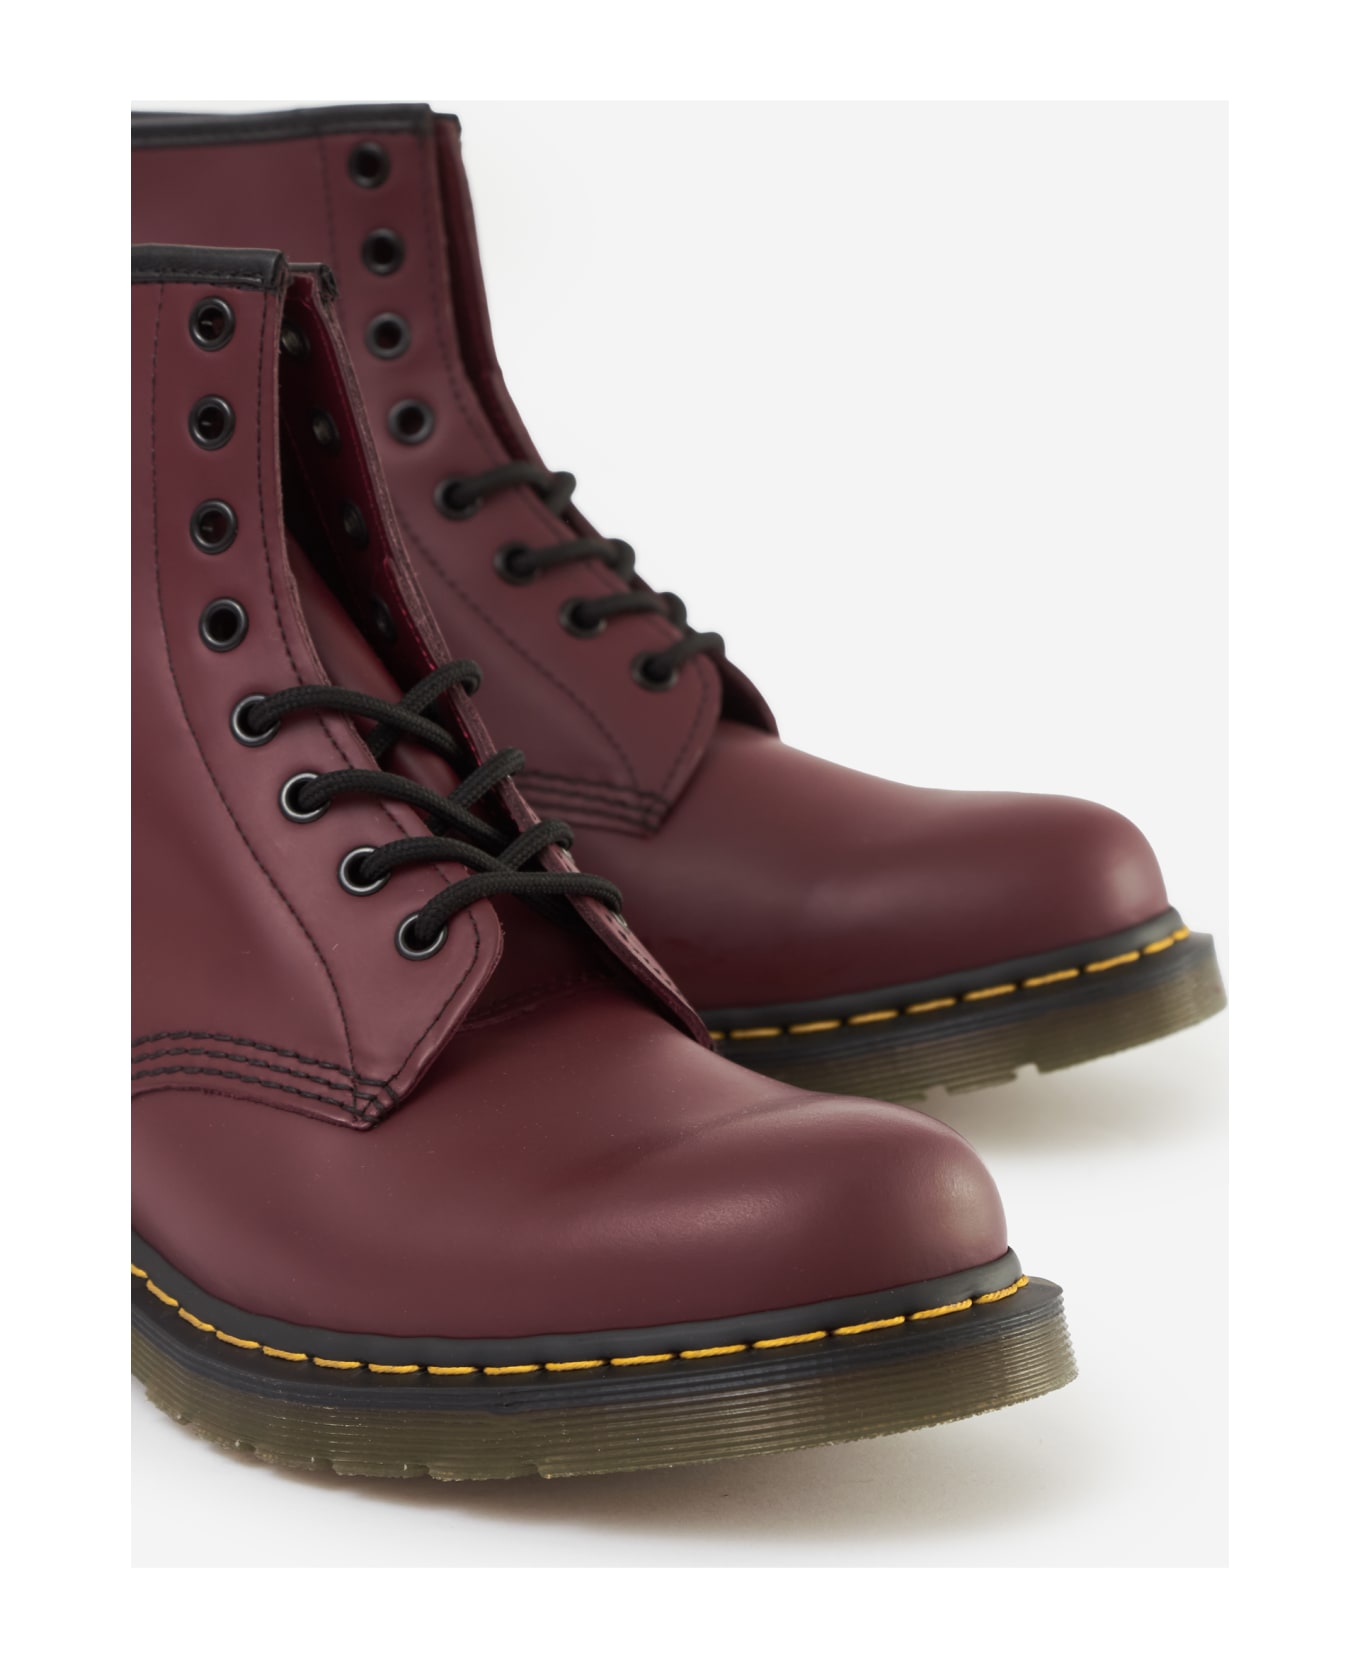 Dr. Martens 1460 Smooth Combat Boots - red name:458